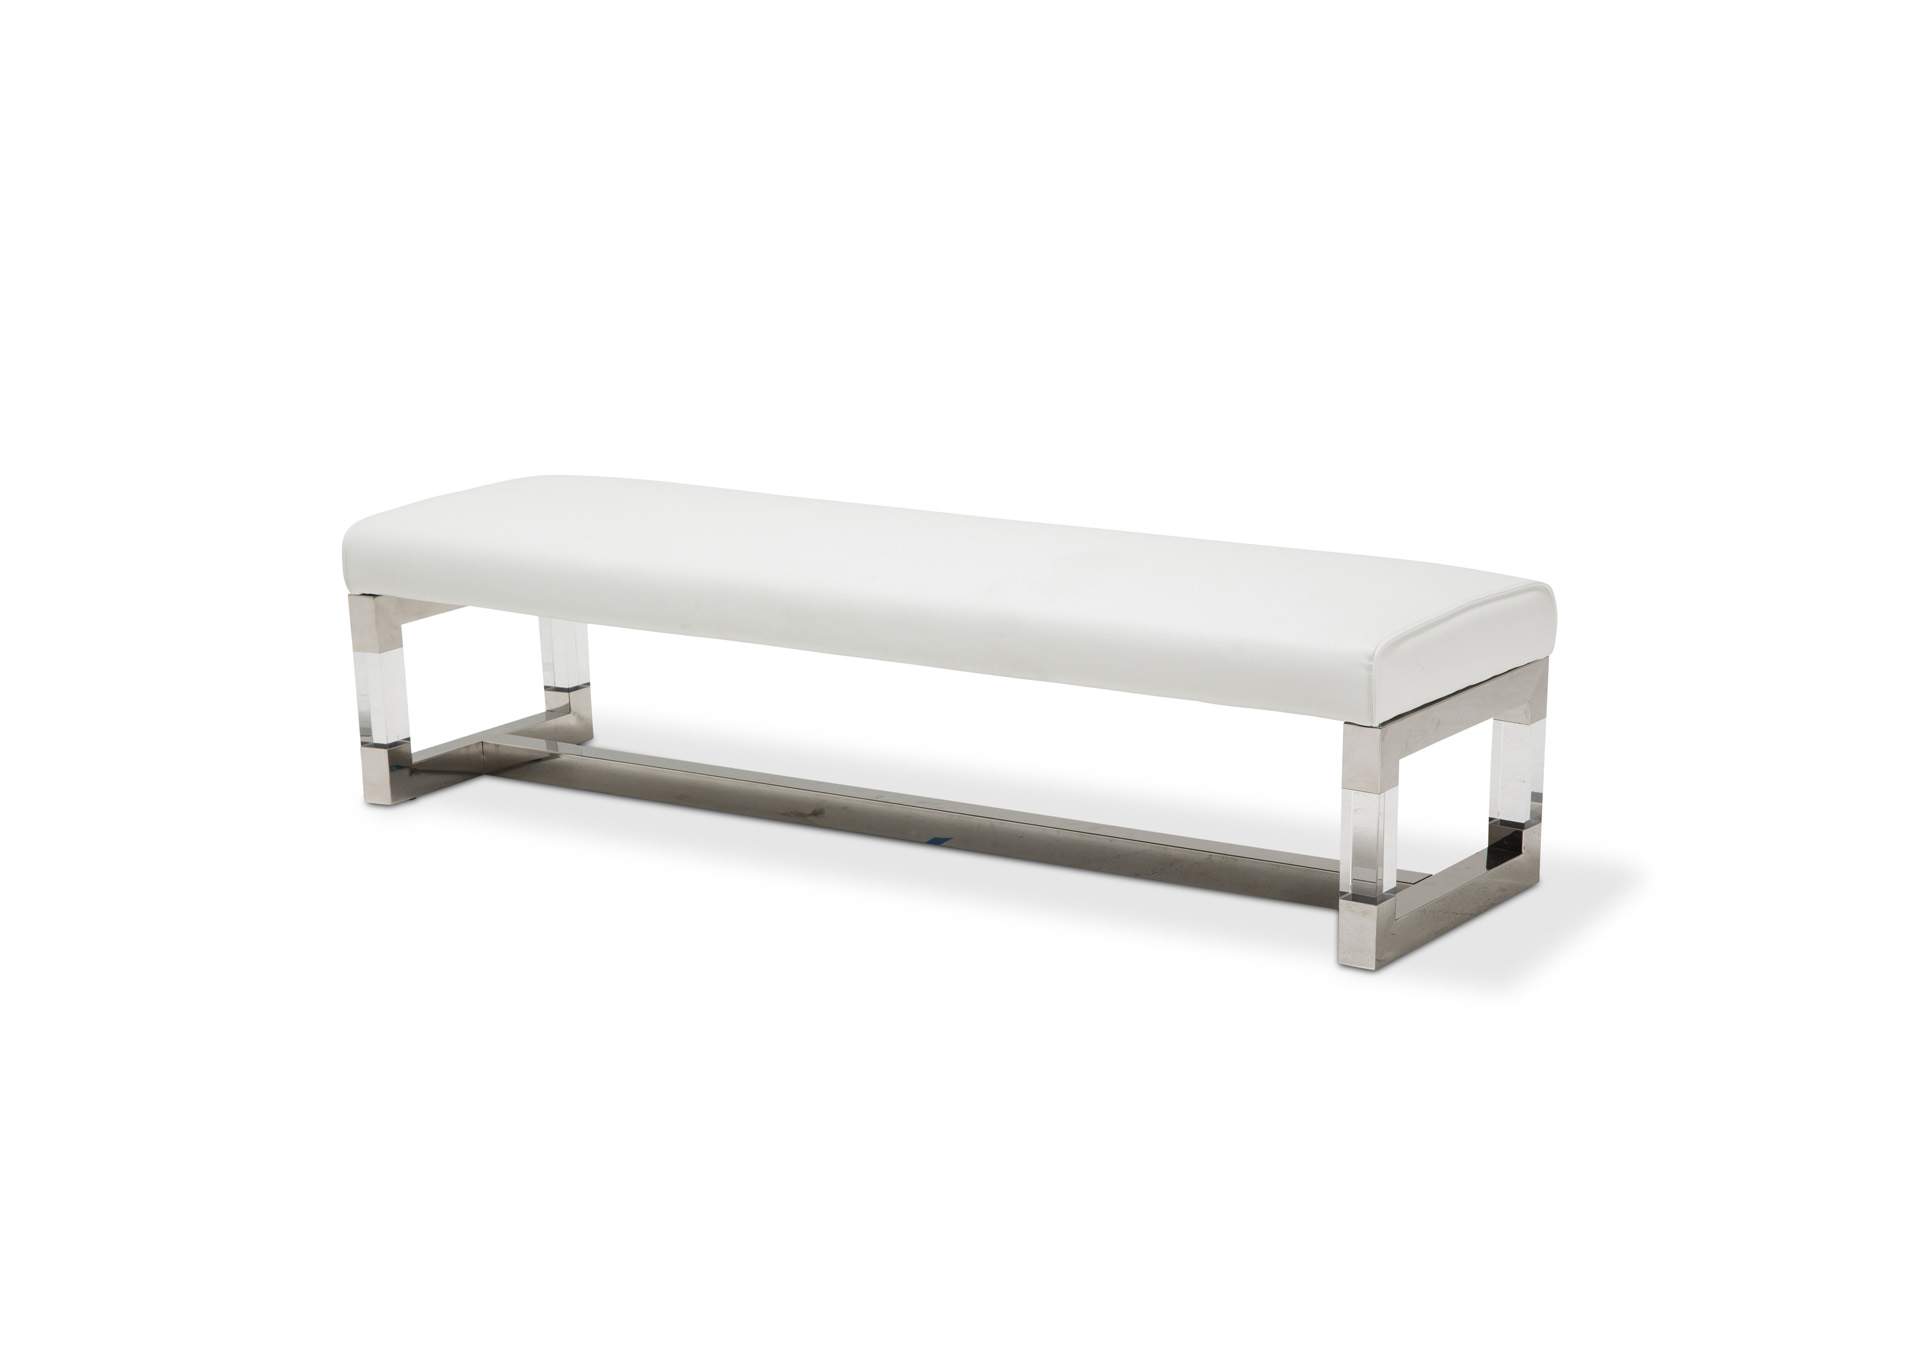 State St. Non Storage Bed Bench Stainless Steel,Michael Amini (AICO)